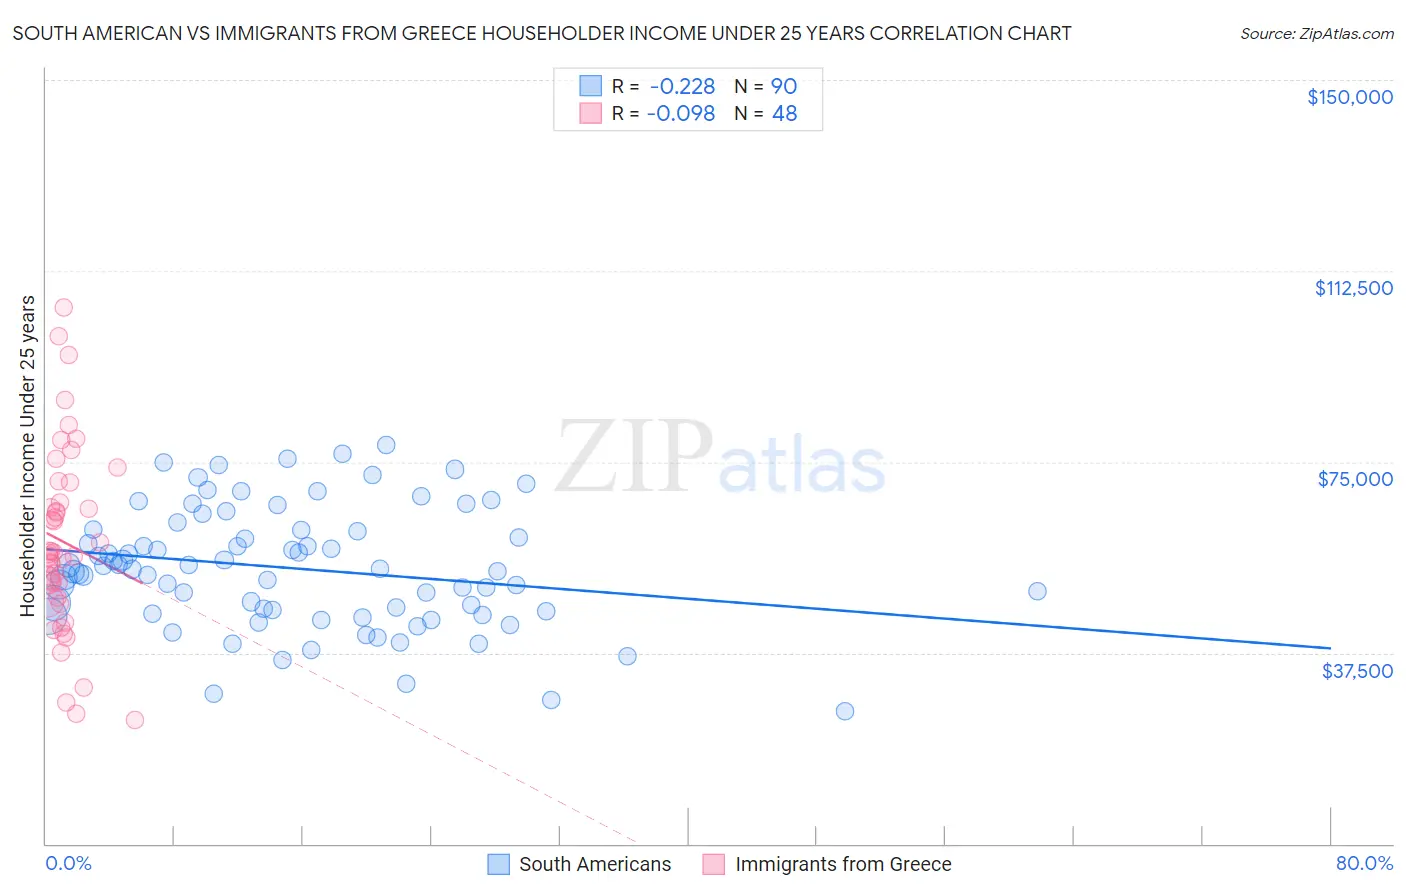 South American vs Immigrants from Greece Householder Income Under 25 years